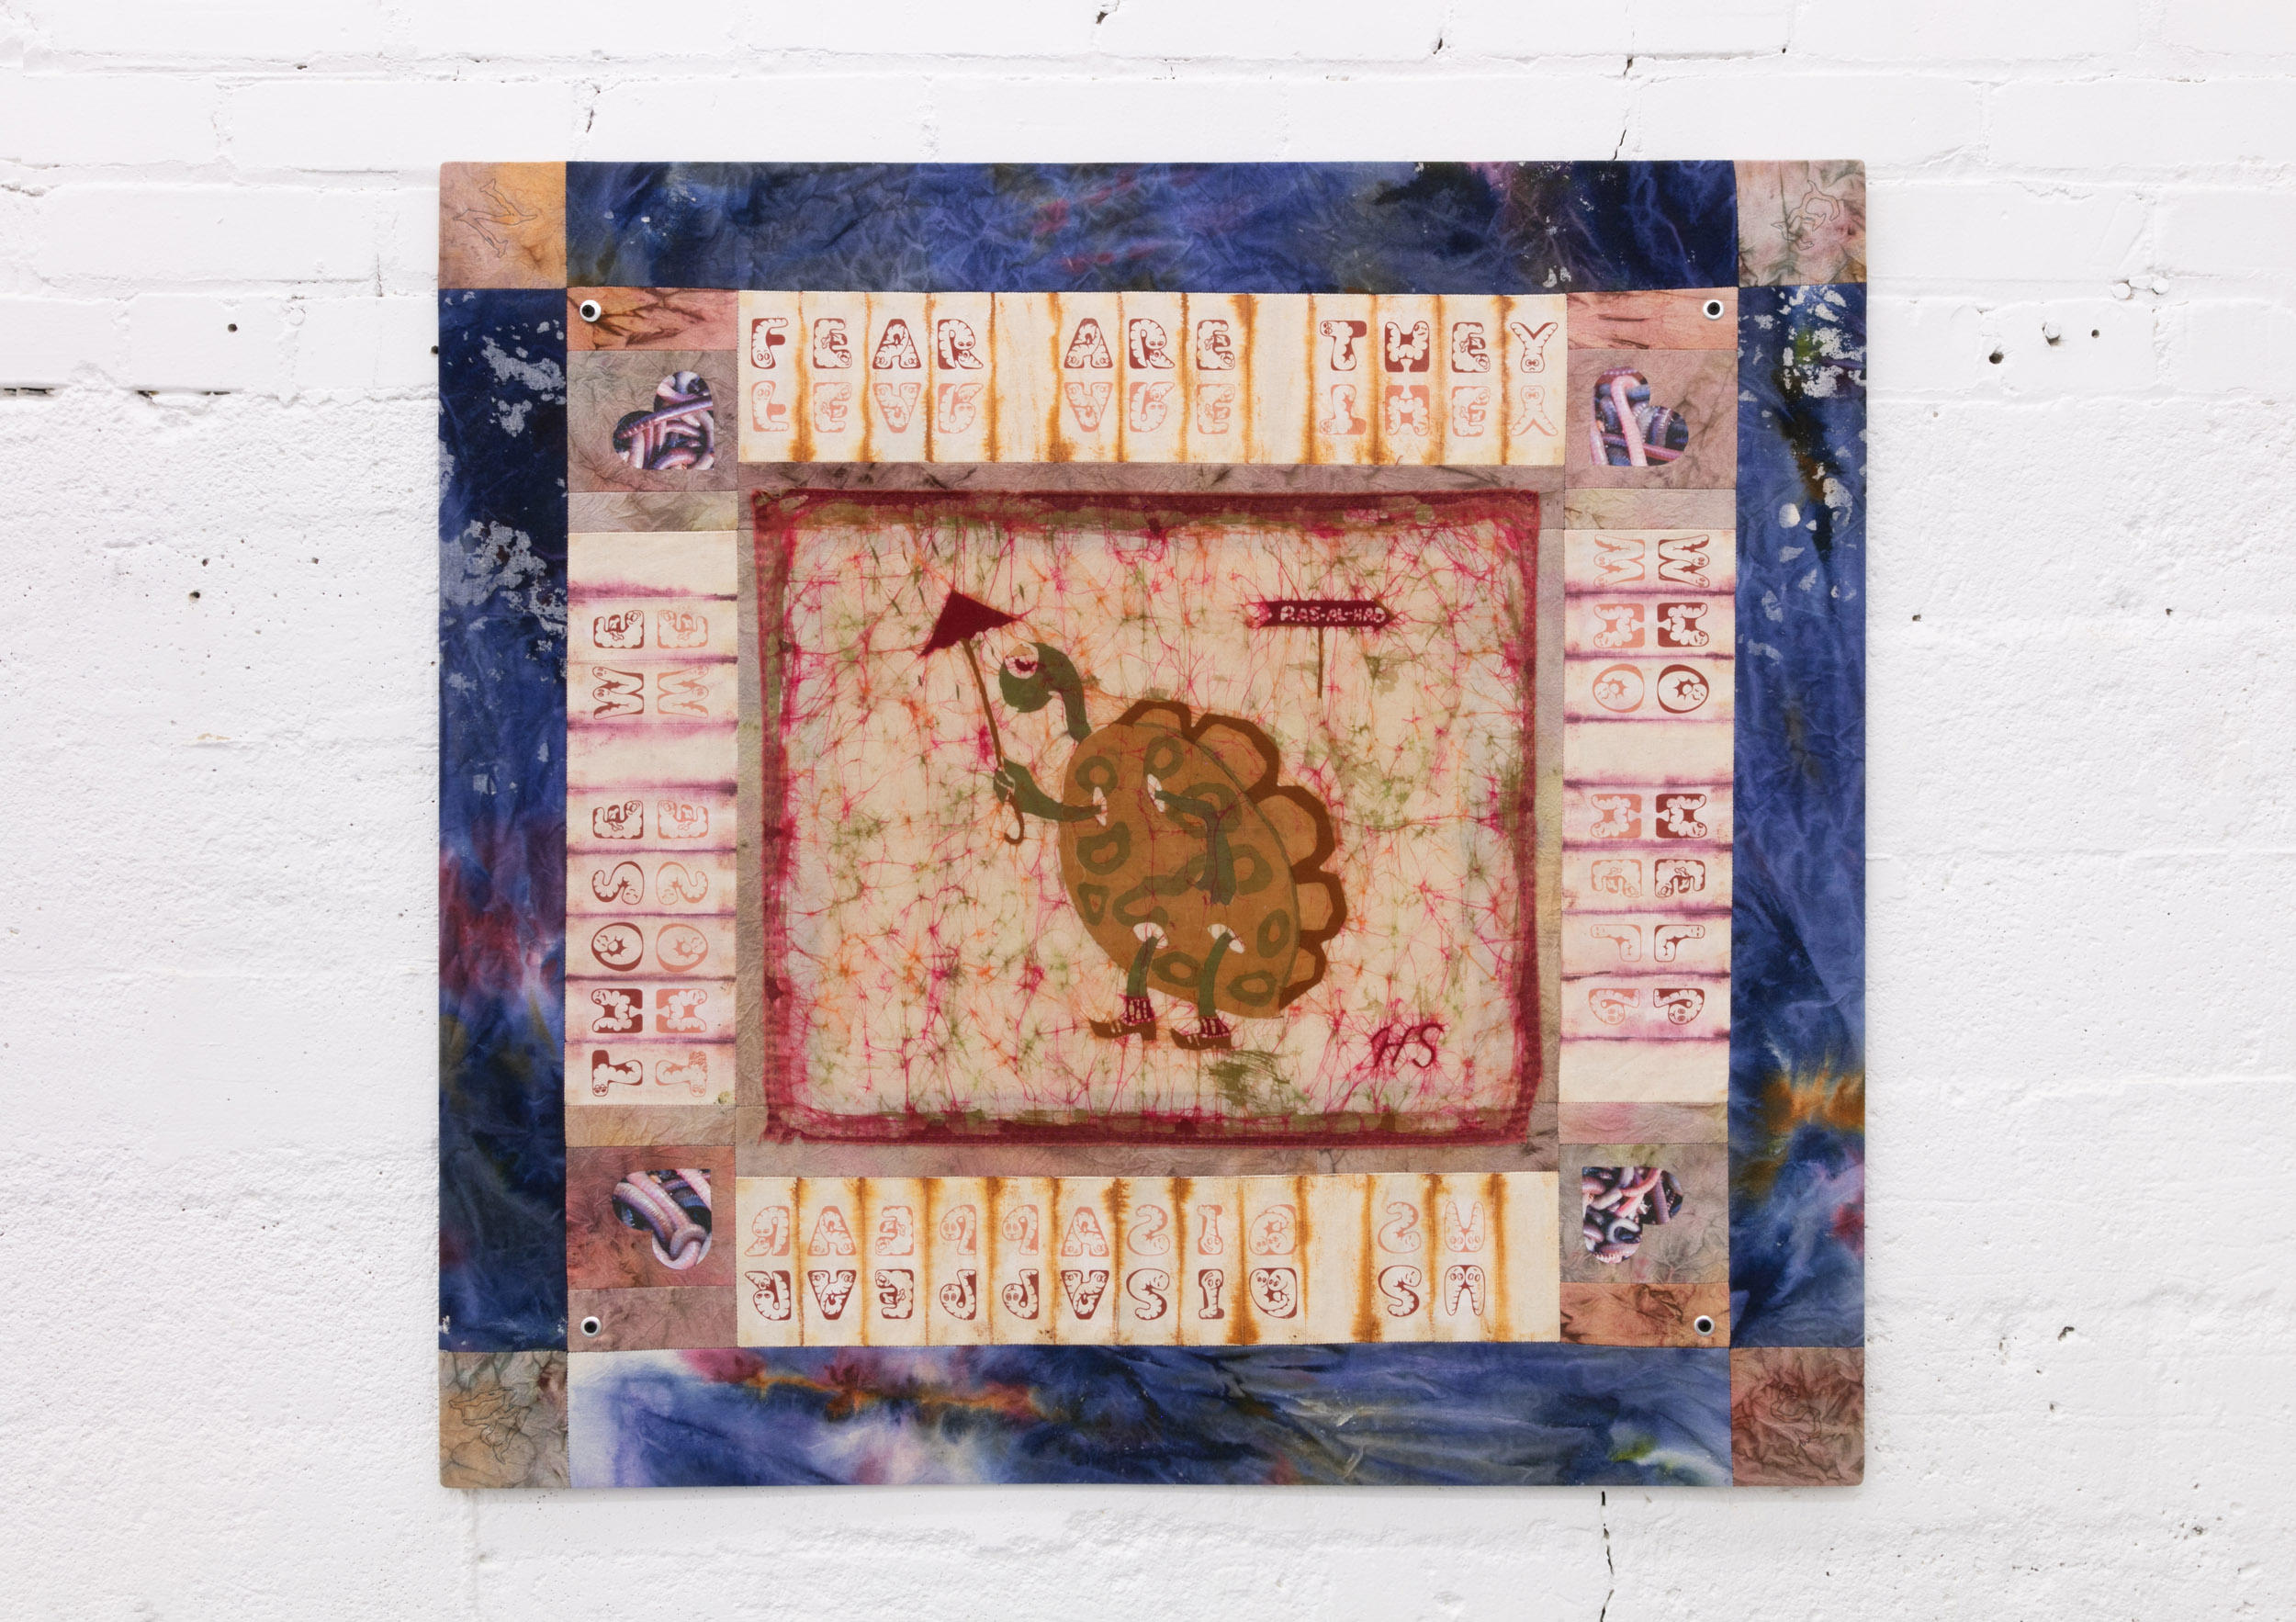  Elif Saydam,  Mutter Natur , 2019, Inkjet transfer, aluminium grommets on hand-stitched dyed canvas, featuring a Batik print c. 1988 by the artist’s mother, Hülya Saydam, mounted on poplar board 